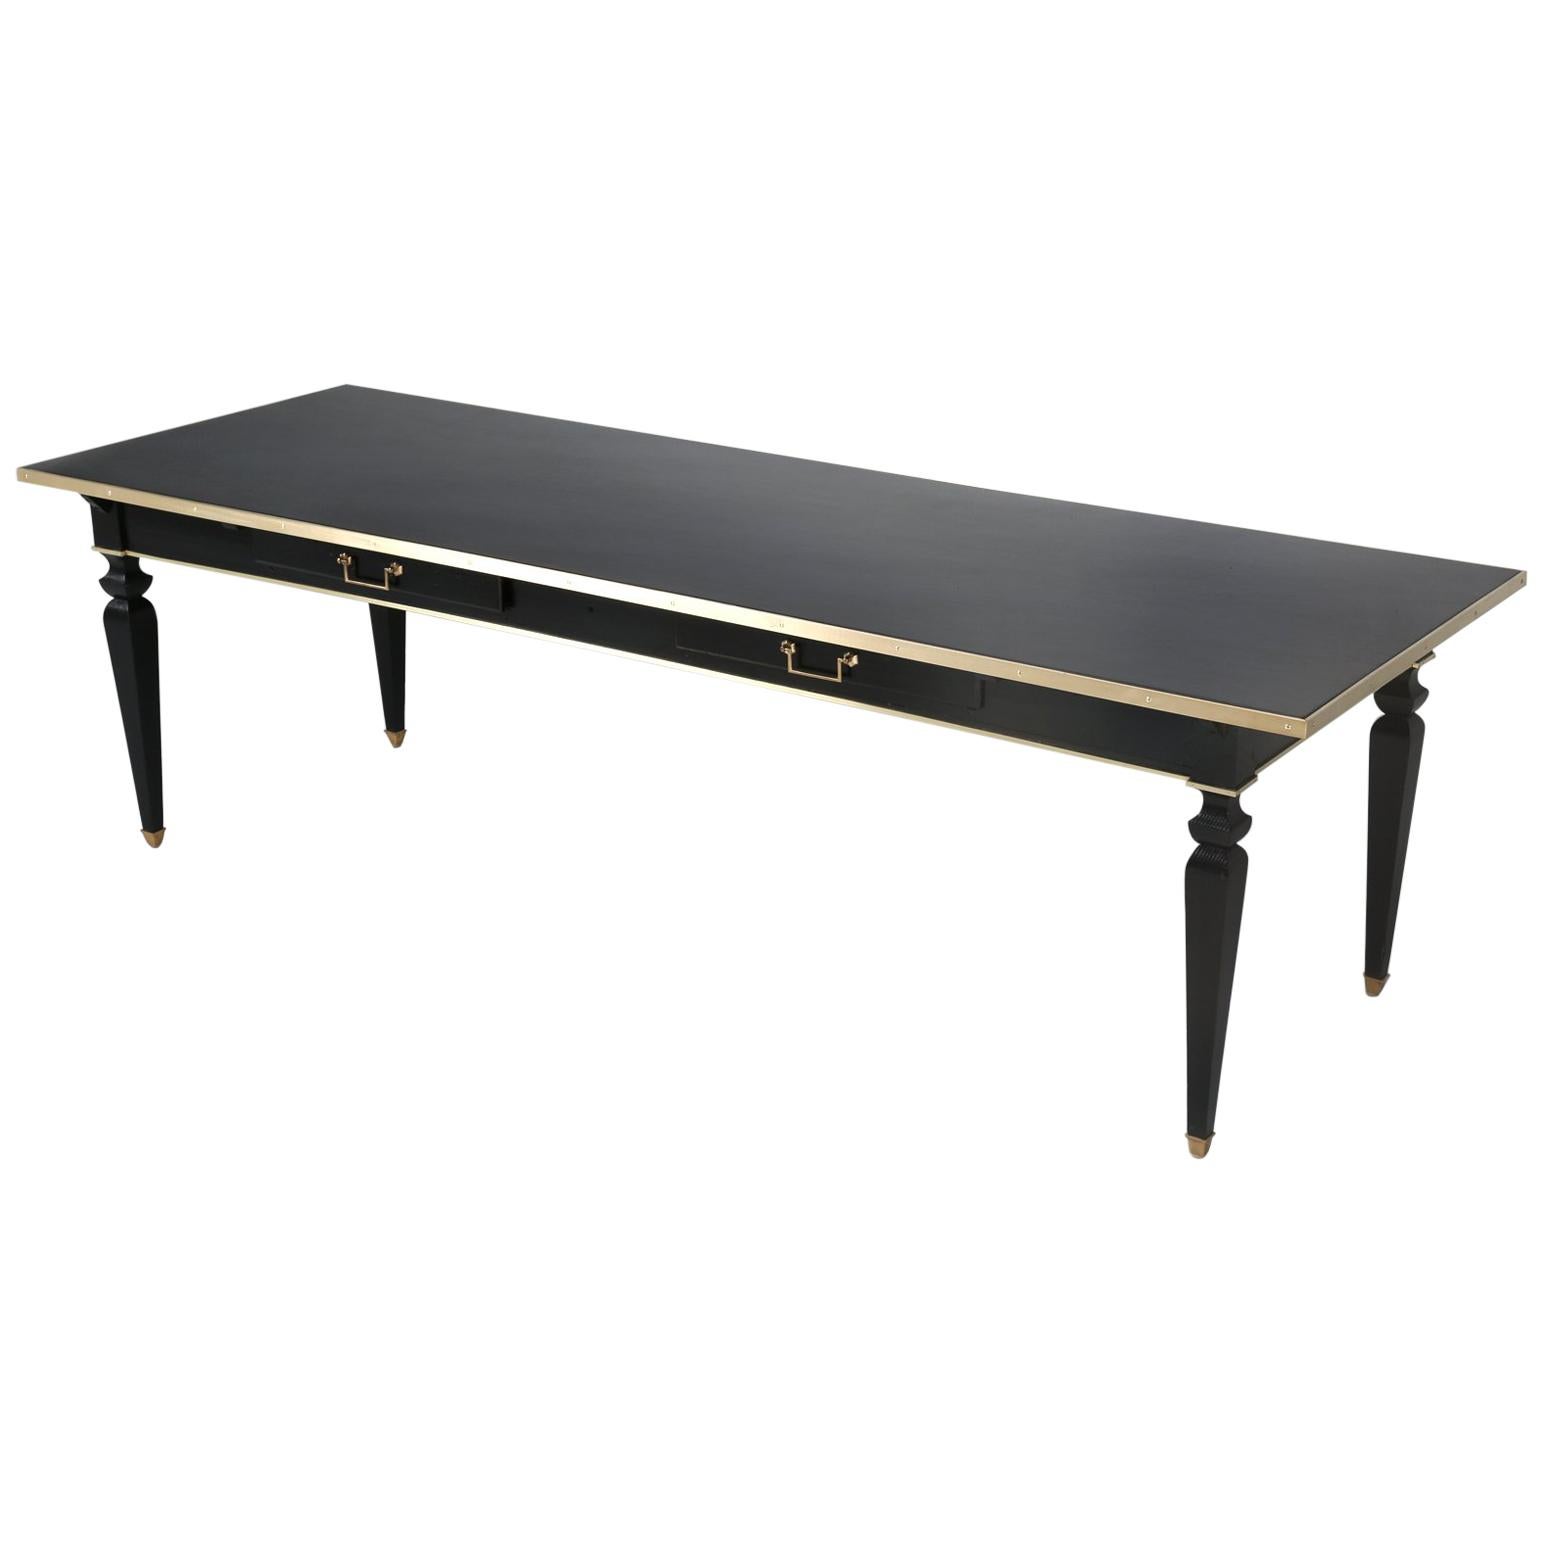 Antique French Black Leather Top Desk, with Brass Trim